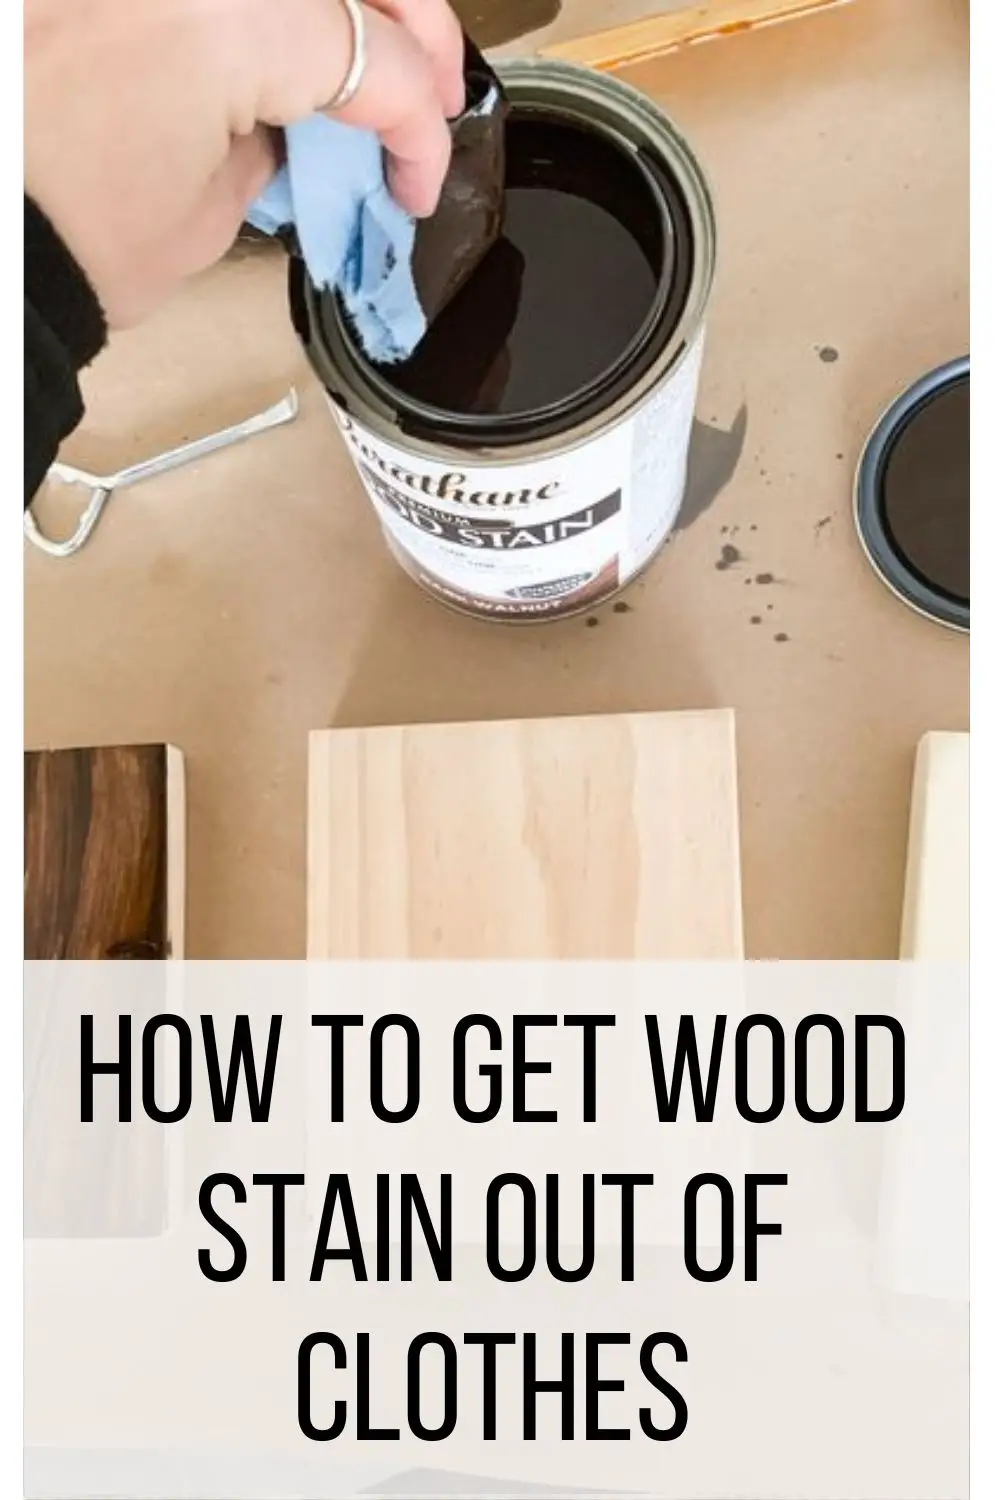 How to Get Wood Stain Out of Clothes